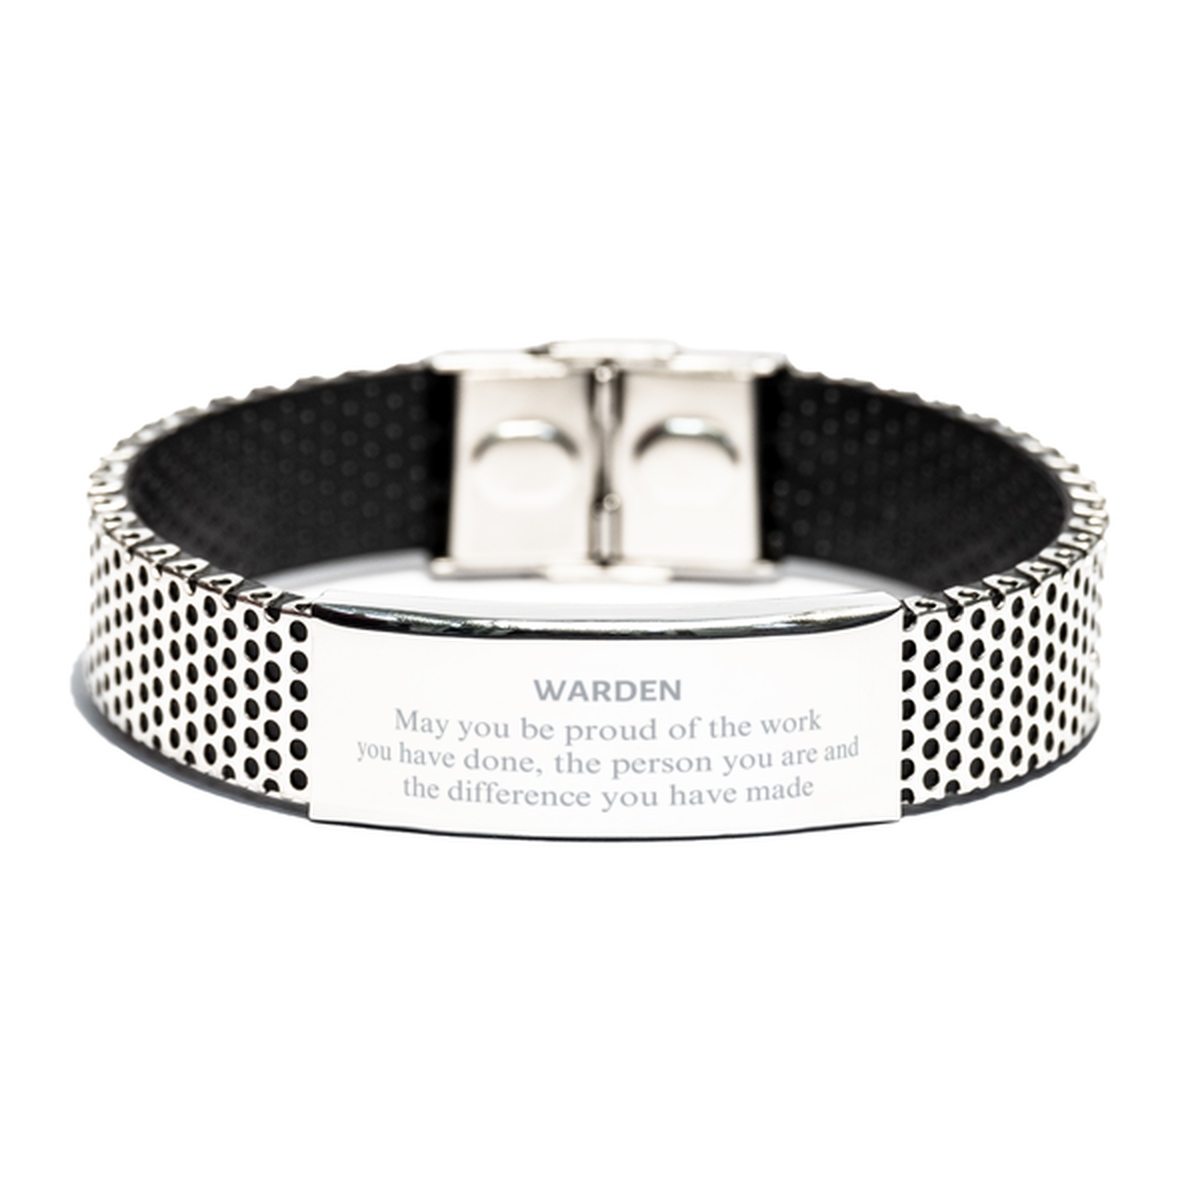 Warden May you be proud of the work you have done, Retirement Warden Stainless Steel Bracelet for Colleague Appreciation Gifts Amazing for Warden